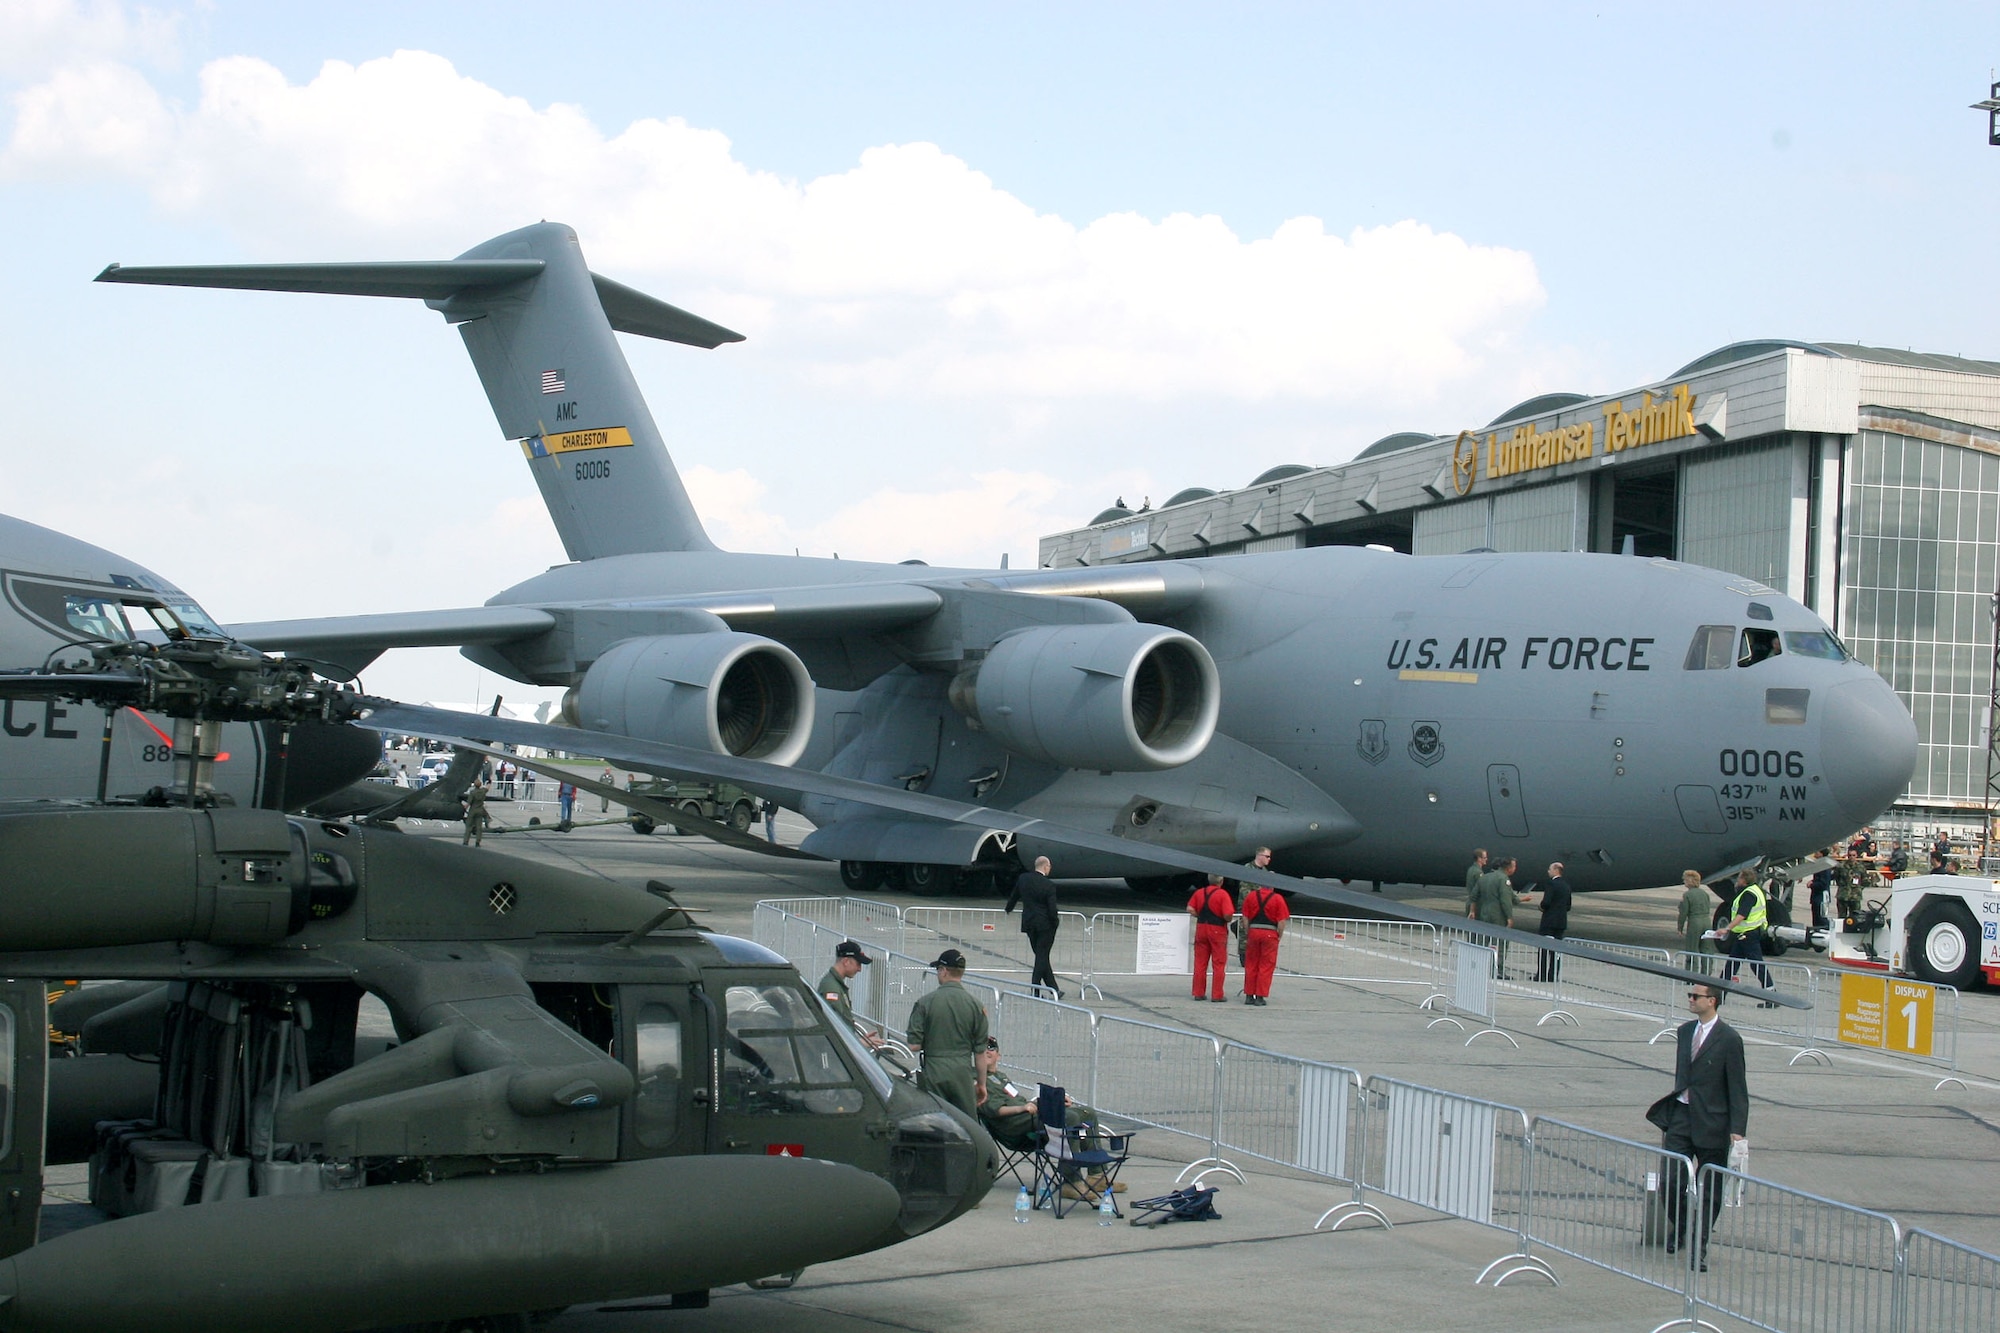 "The Spirit of Berlin," a C-17 Globemaster III from Charleston Air Force Base, S.C., is one of ten U.S. Air Force and Army aircraft on display at the Berlin Air Show May 16-21, 2006, at the Berlin-Schoenefeld Airport.  A highlight of the air show was a special flight demonstration by the C-17.  (U.S. Air Force photo/Maj. Pamela A.Q. Cook)